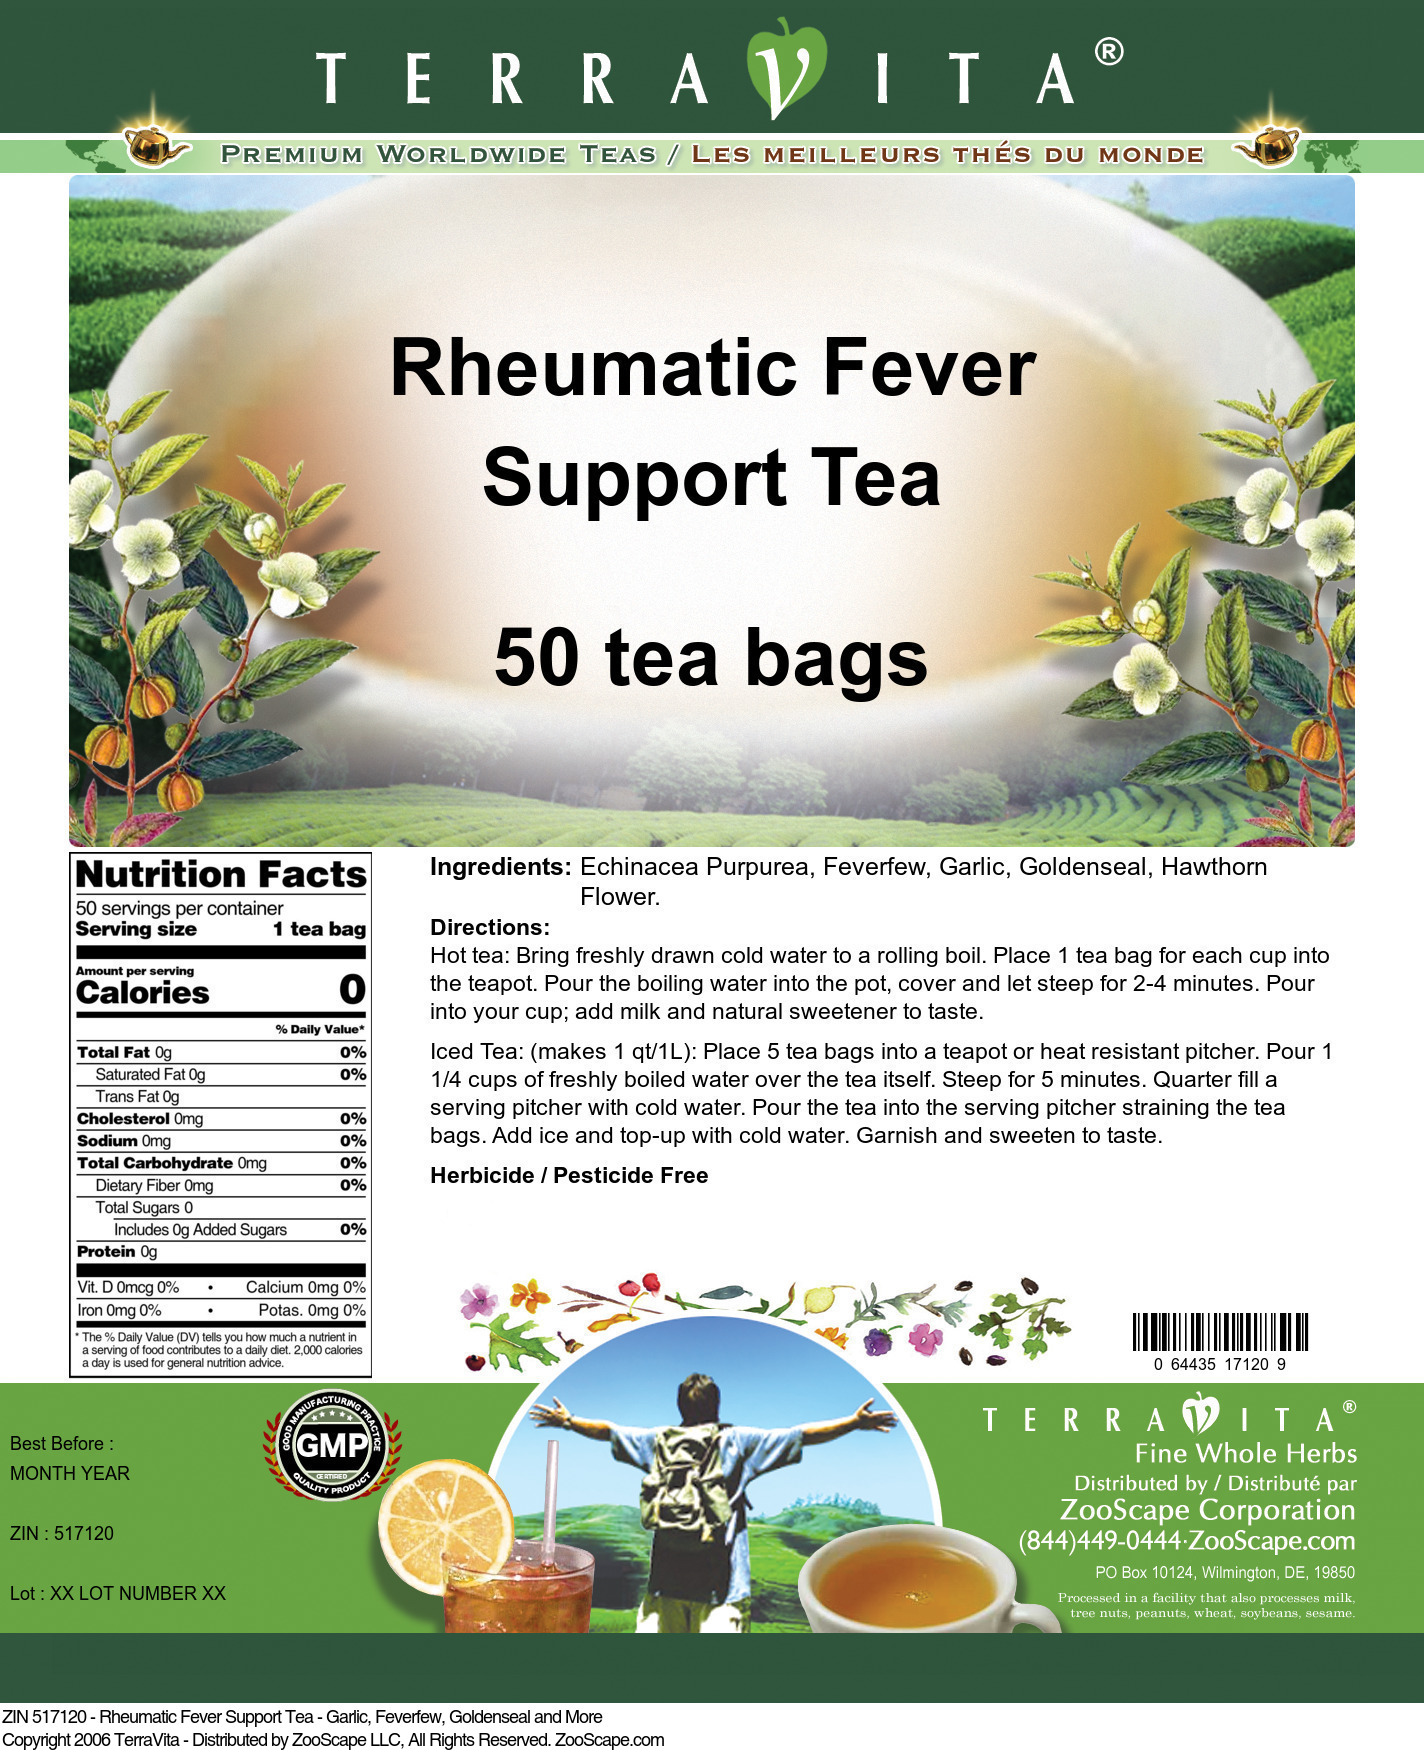 Rheumatic Fever Support Tea - Garlic, Feverfew, Goldenseal and More - Label